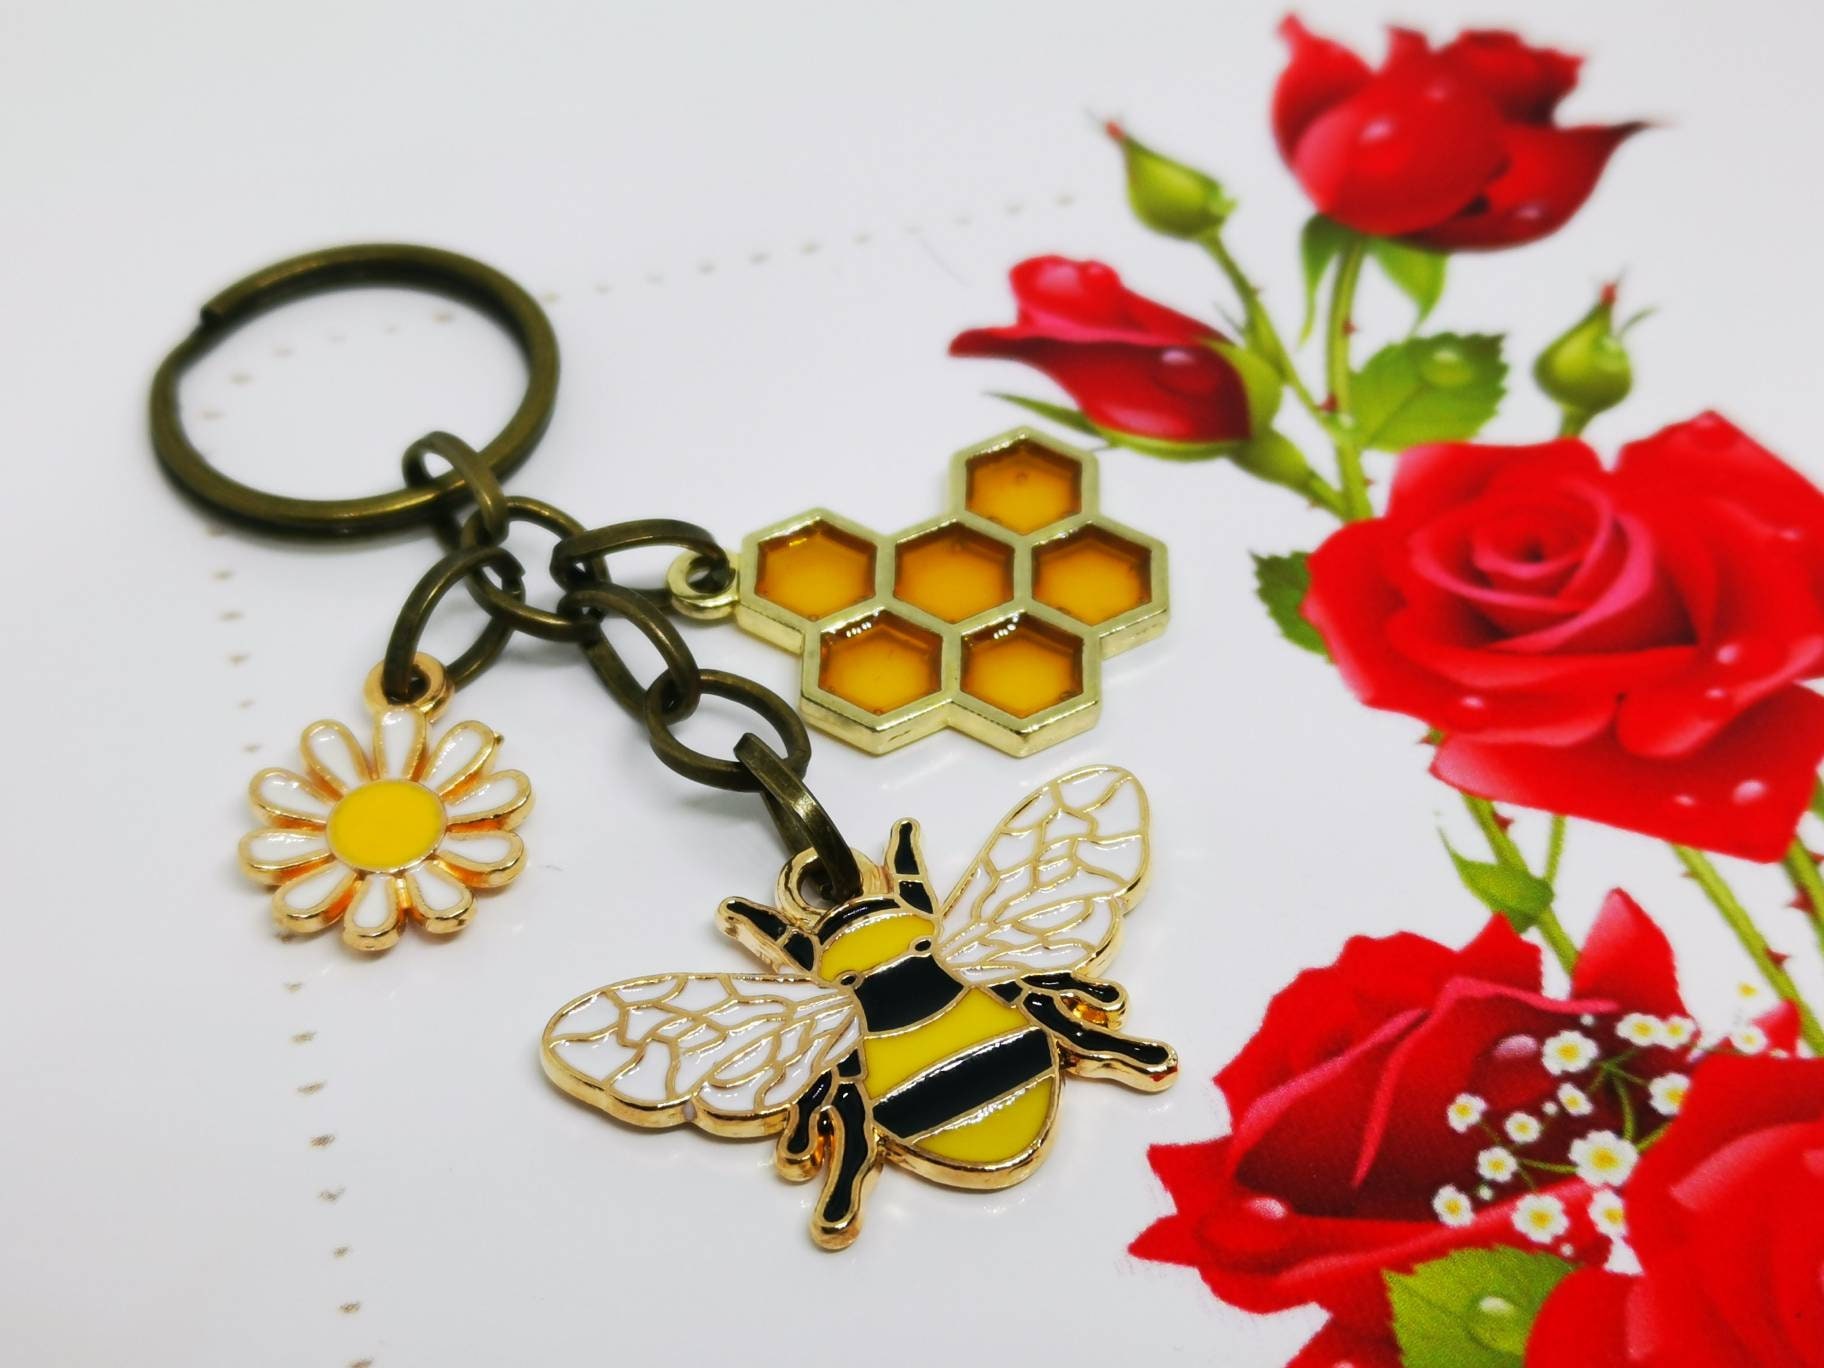 Bee Keychain, Key Charm, Bee Accessories, Cute Keychain, Wood Keychain, Bee Decor, Purse Accessories, Honey, Gift for Bee Lover, Bee